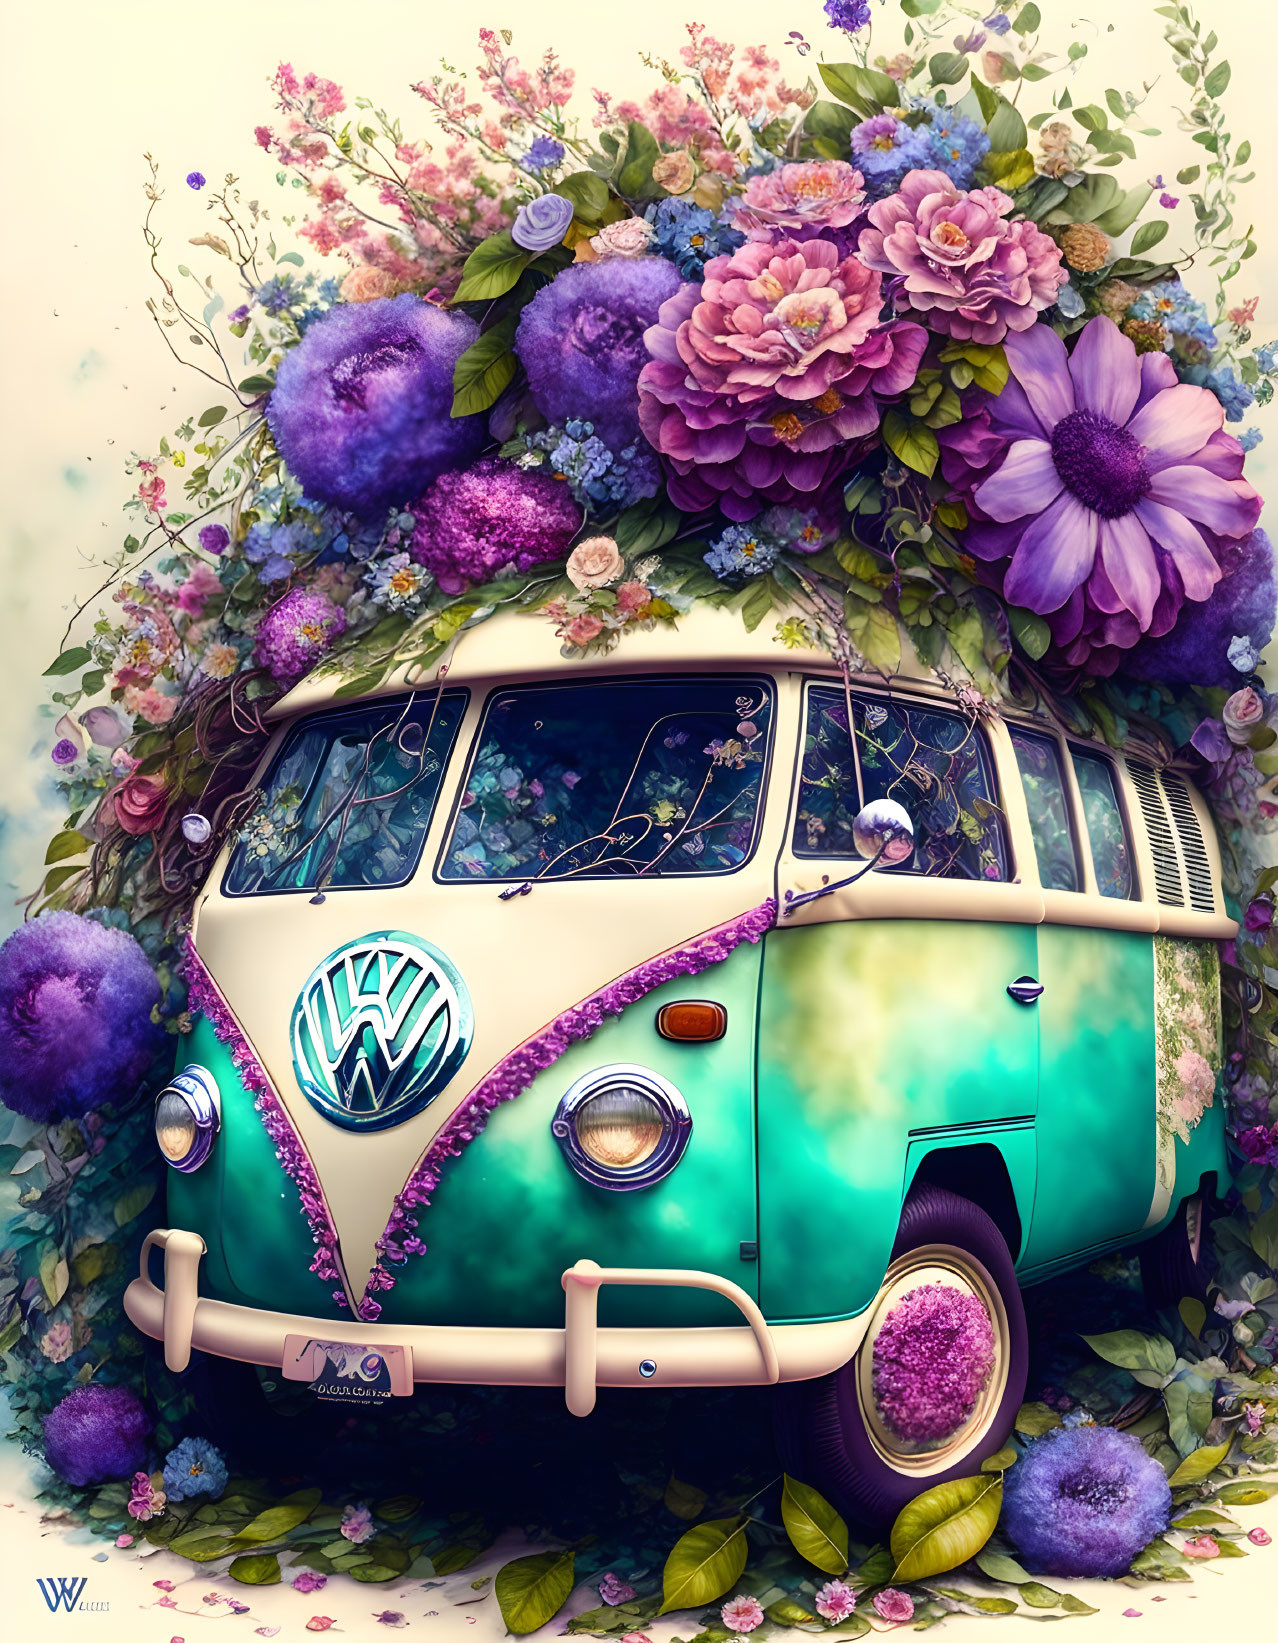 Colorful Vintage Volkswagen Van with Oversized Flowers and Foliage